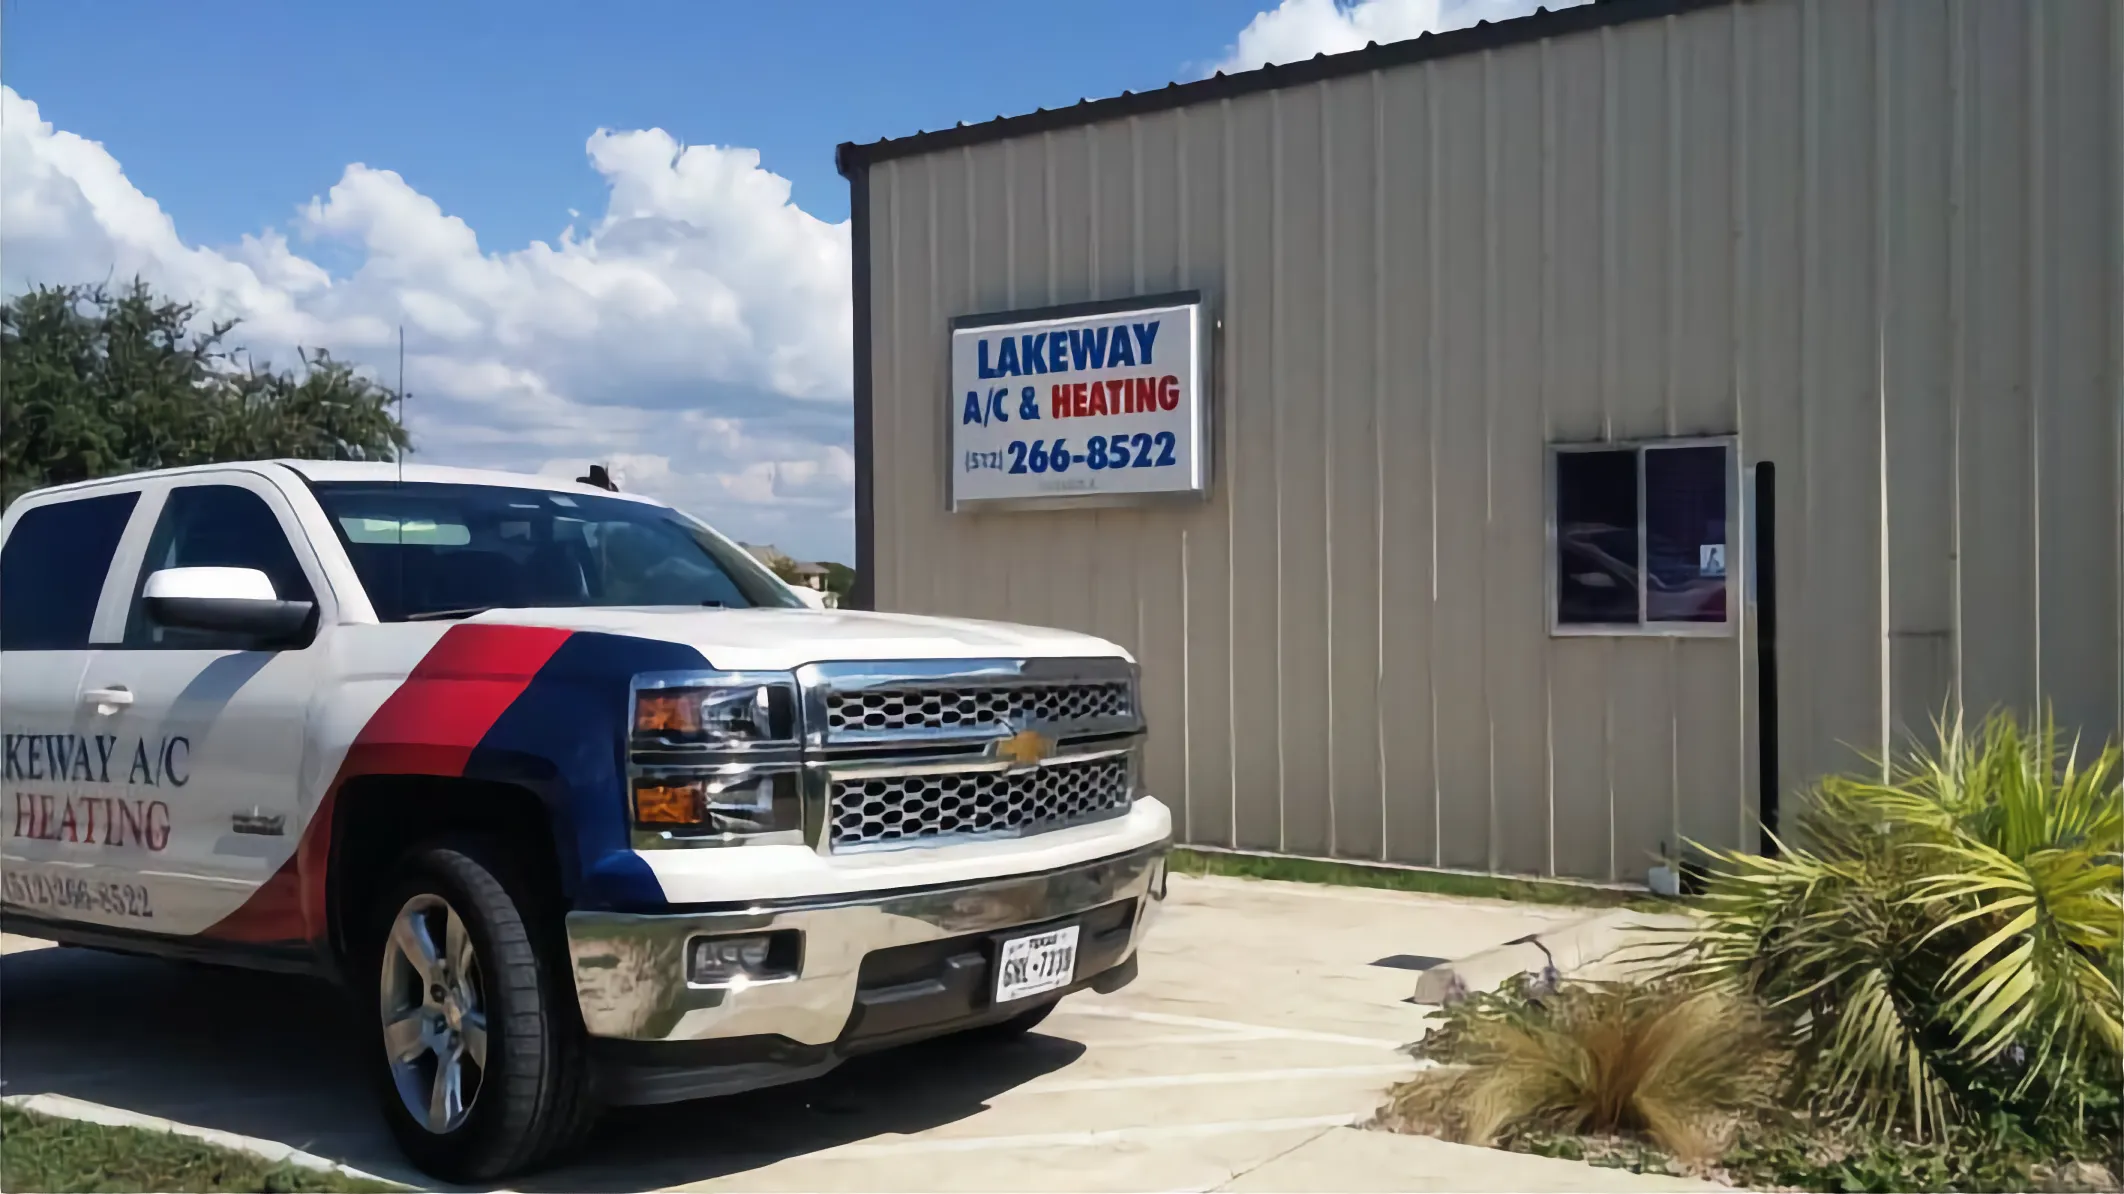 Lakeway A/C & Heating Office